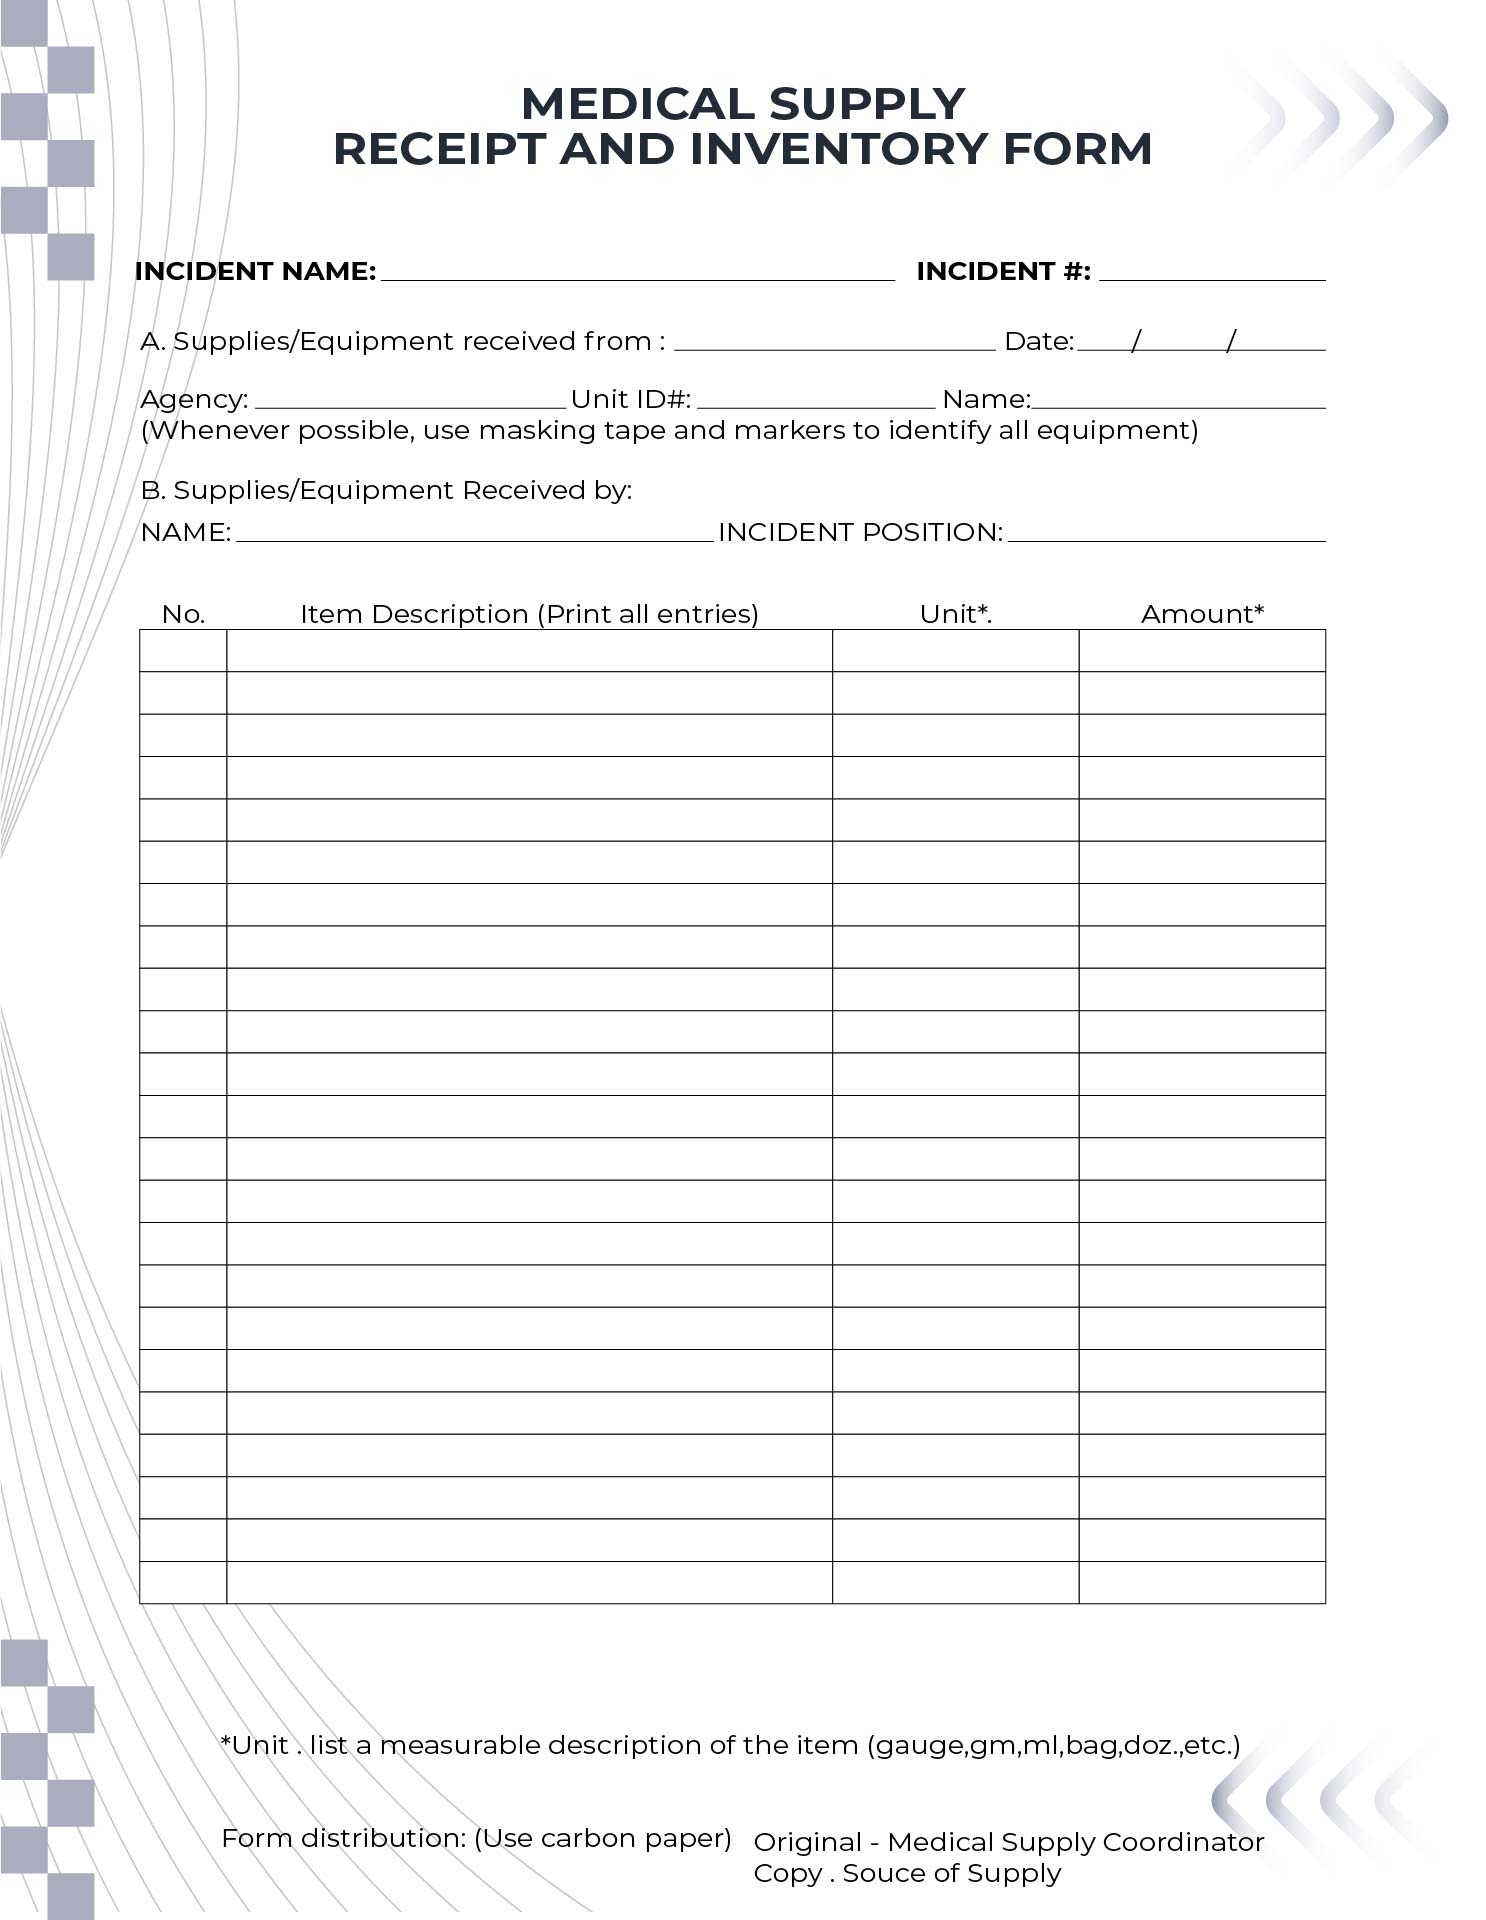 Printable Receipt Of Medical Equipment Form Template